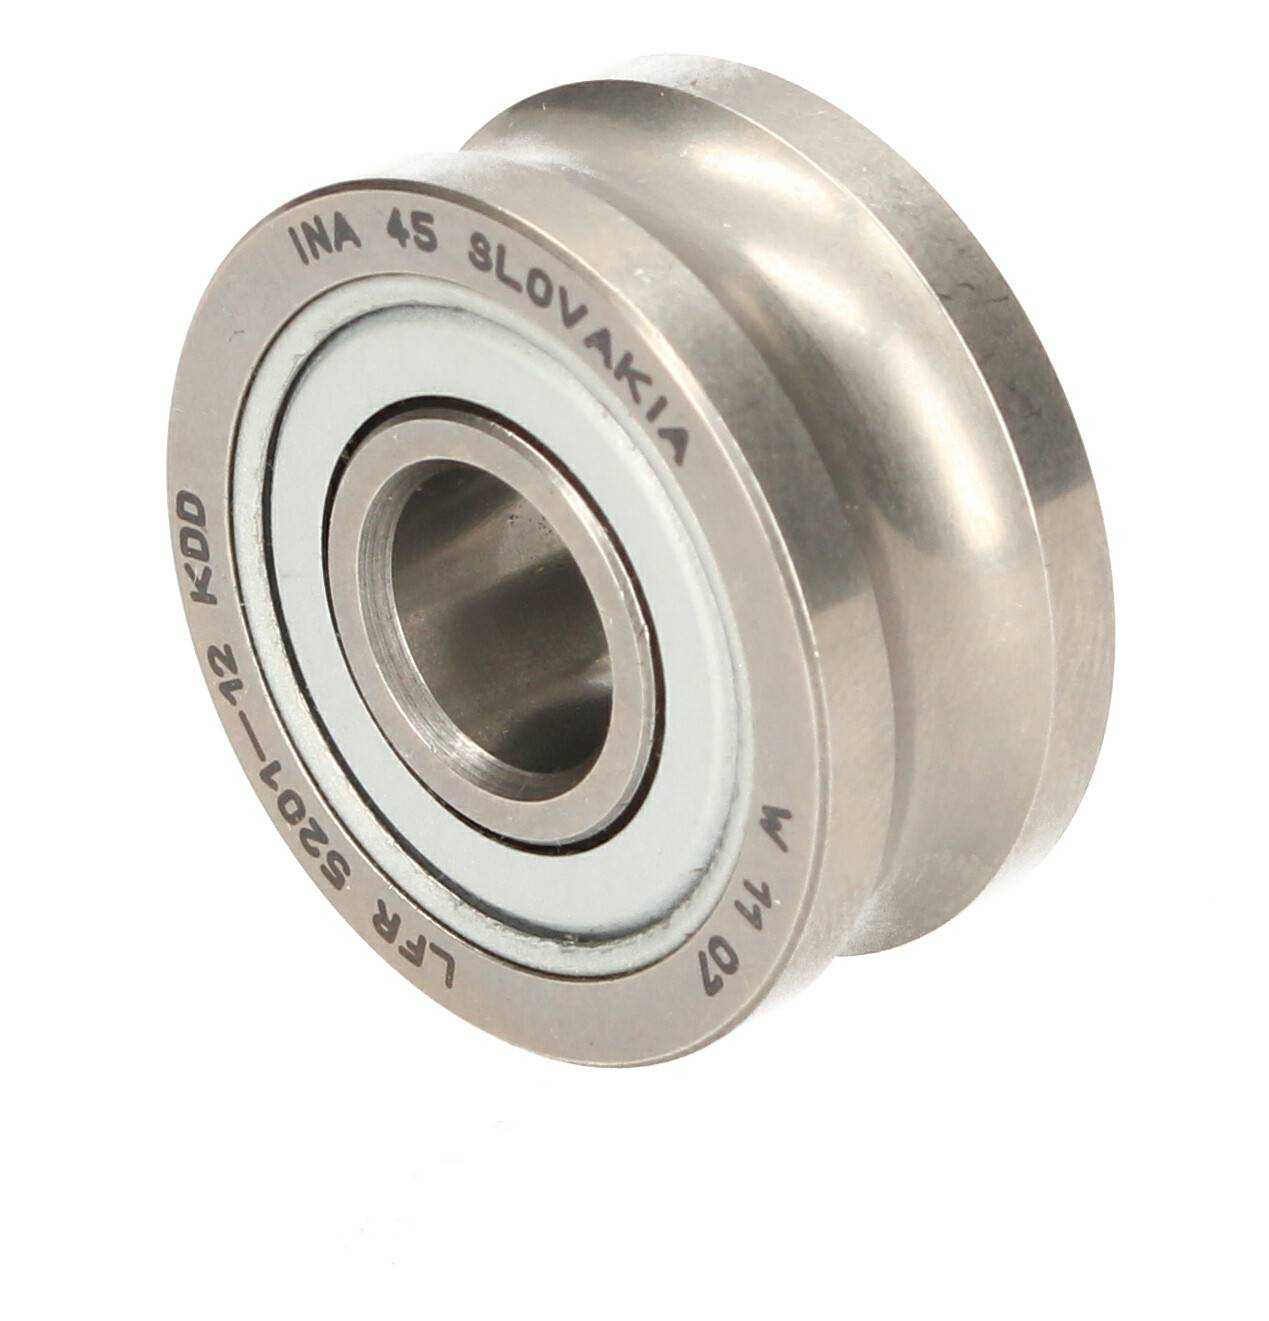 SUPPORT BEARING LFR-5201-12-KDD-INA (WITHOUT PACKAGING) - Image 1